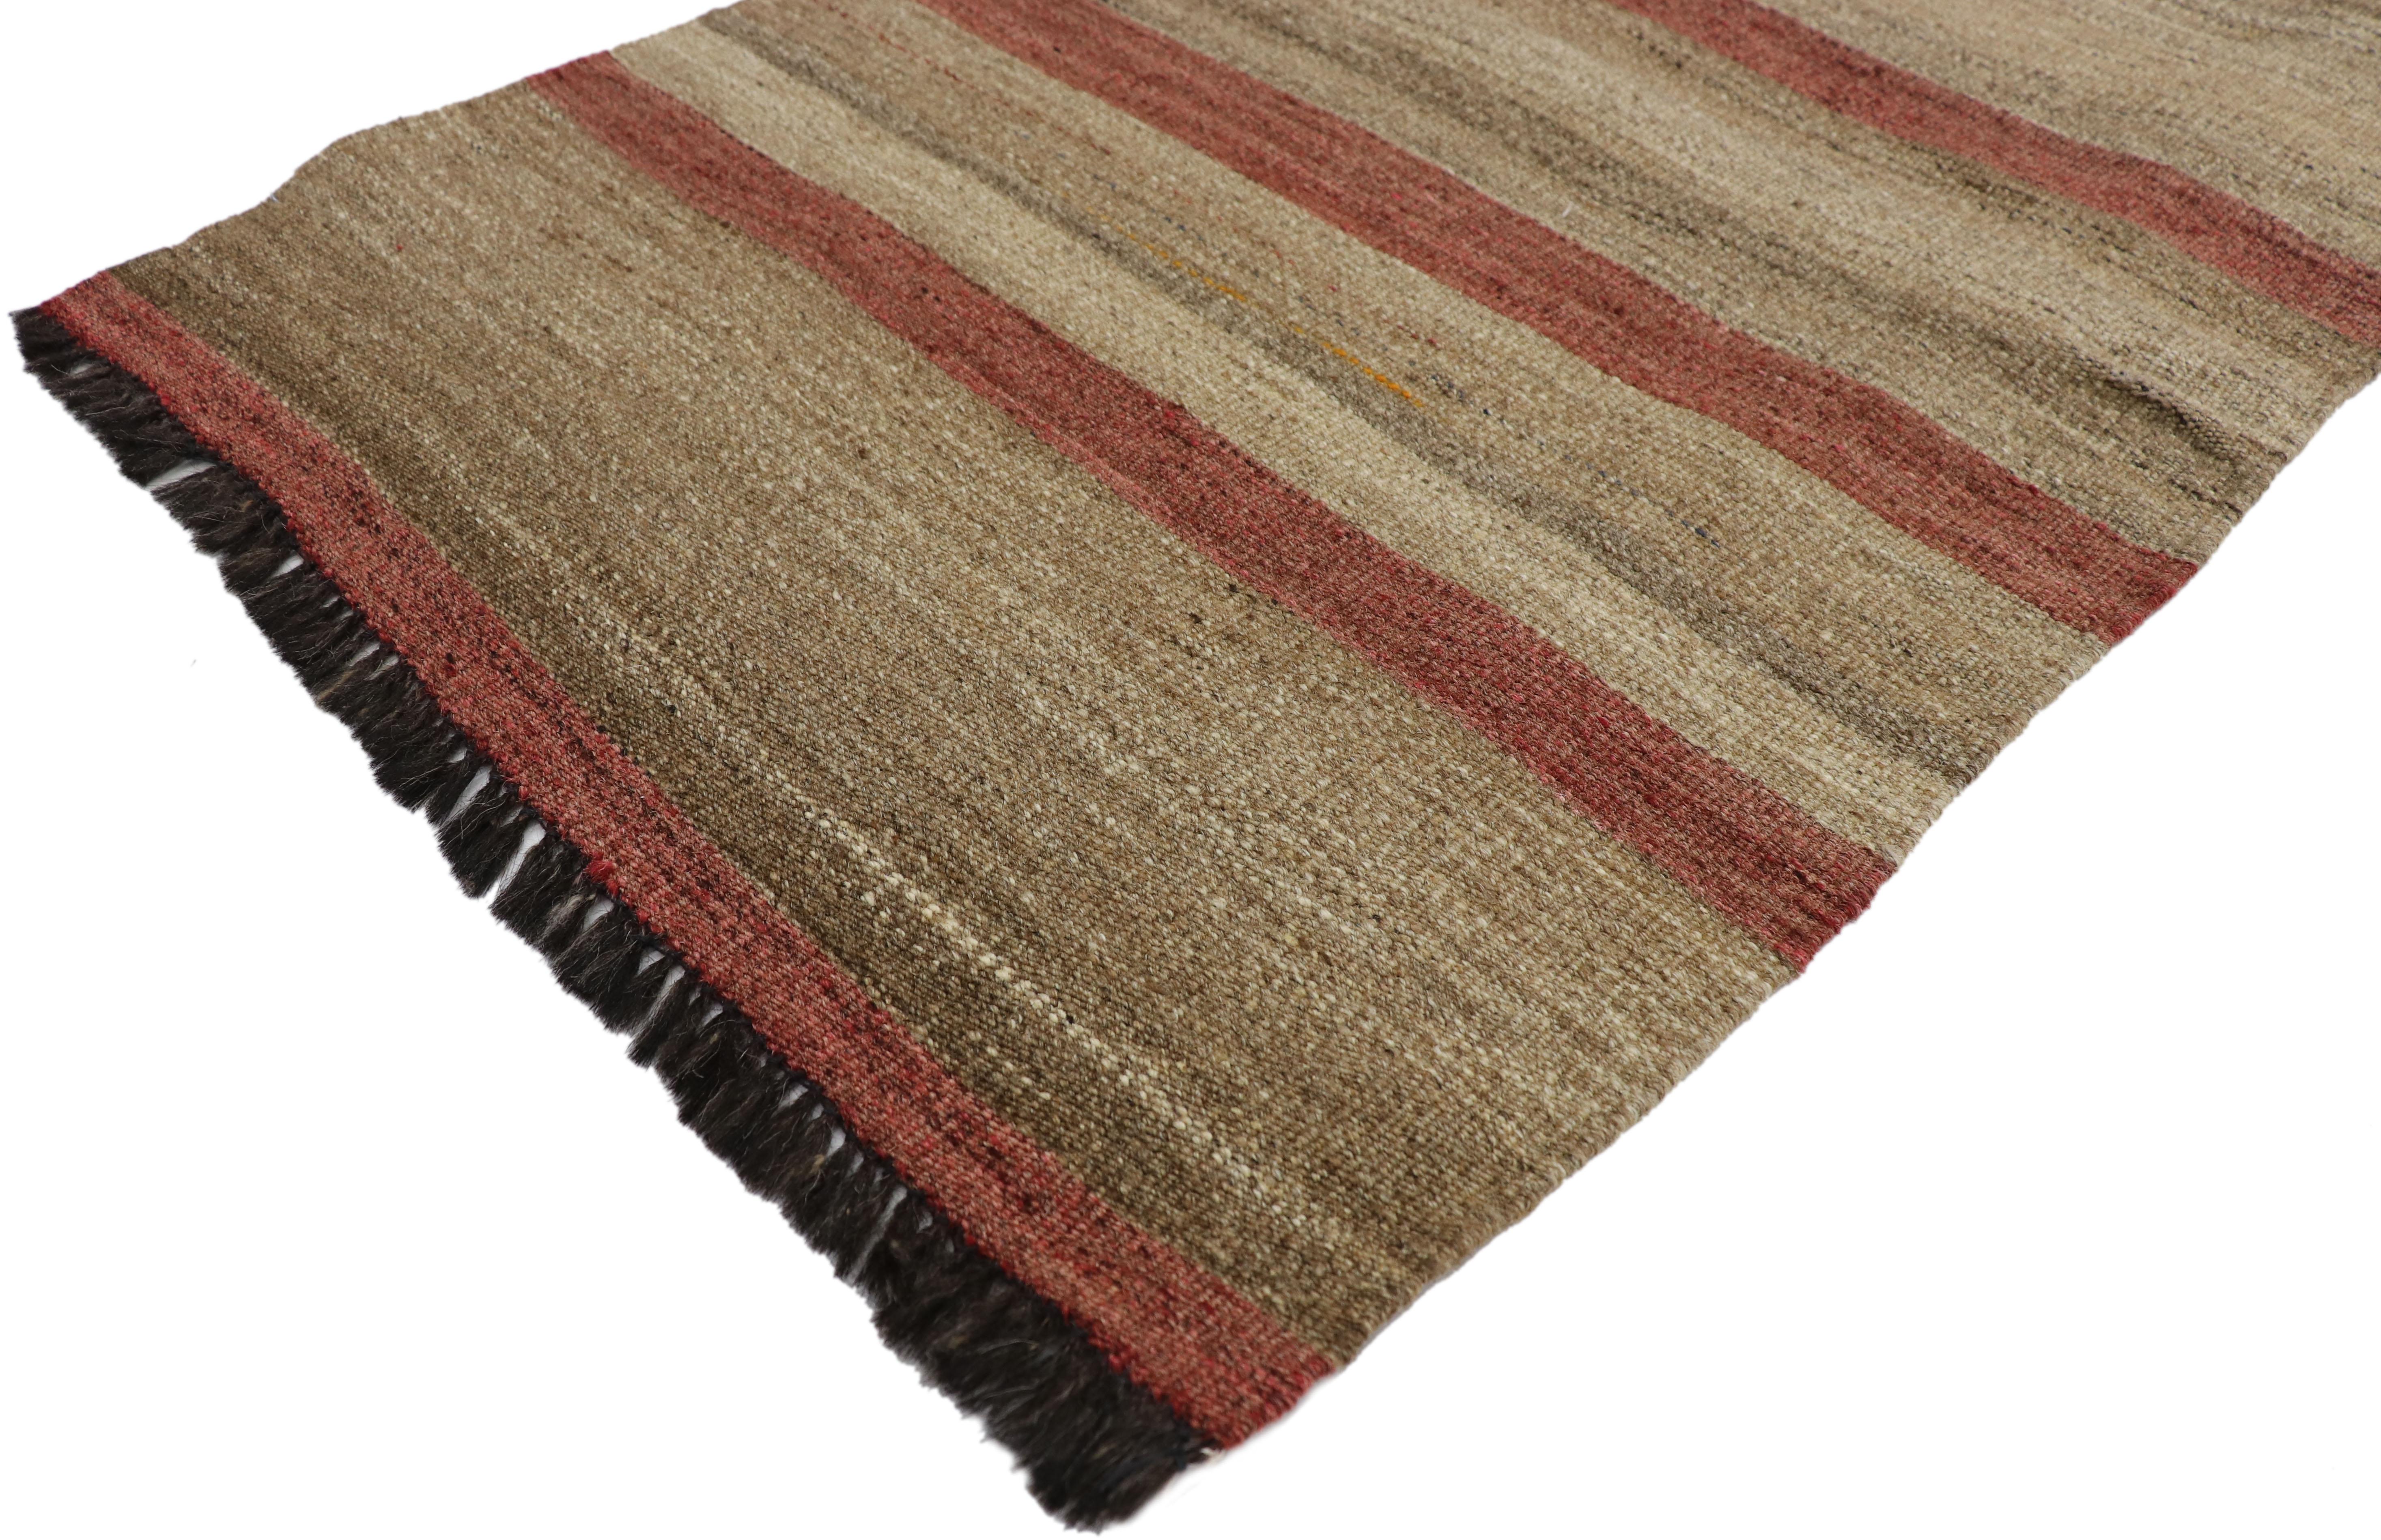 74861, vintage Turkish Kilim rug with Earth Tone colors. This handwoven wool vintage Turkish Kilim accent rug features a striped pattern in rustic earth-tone colors. A fine example of minimalist style, this Turkish Kilim rug embodies the modern